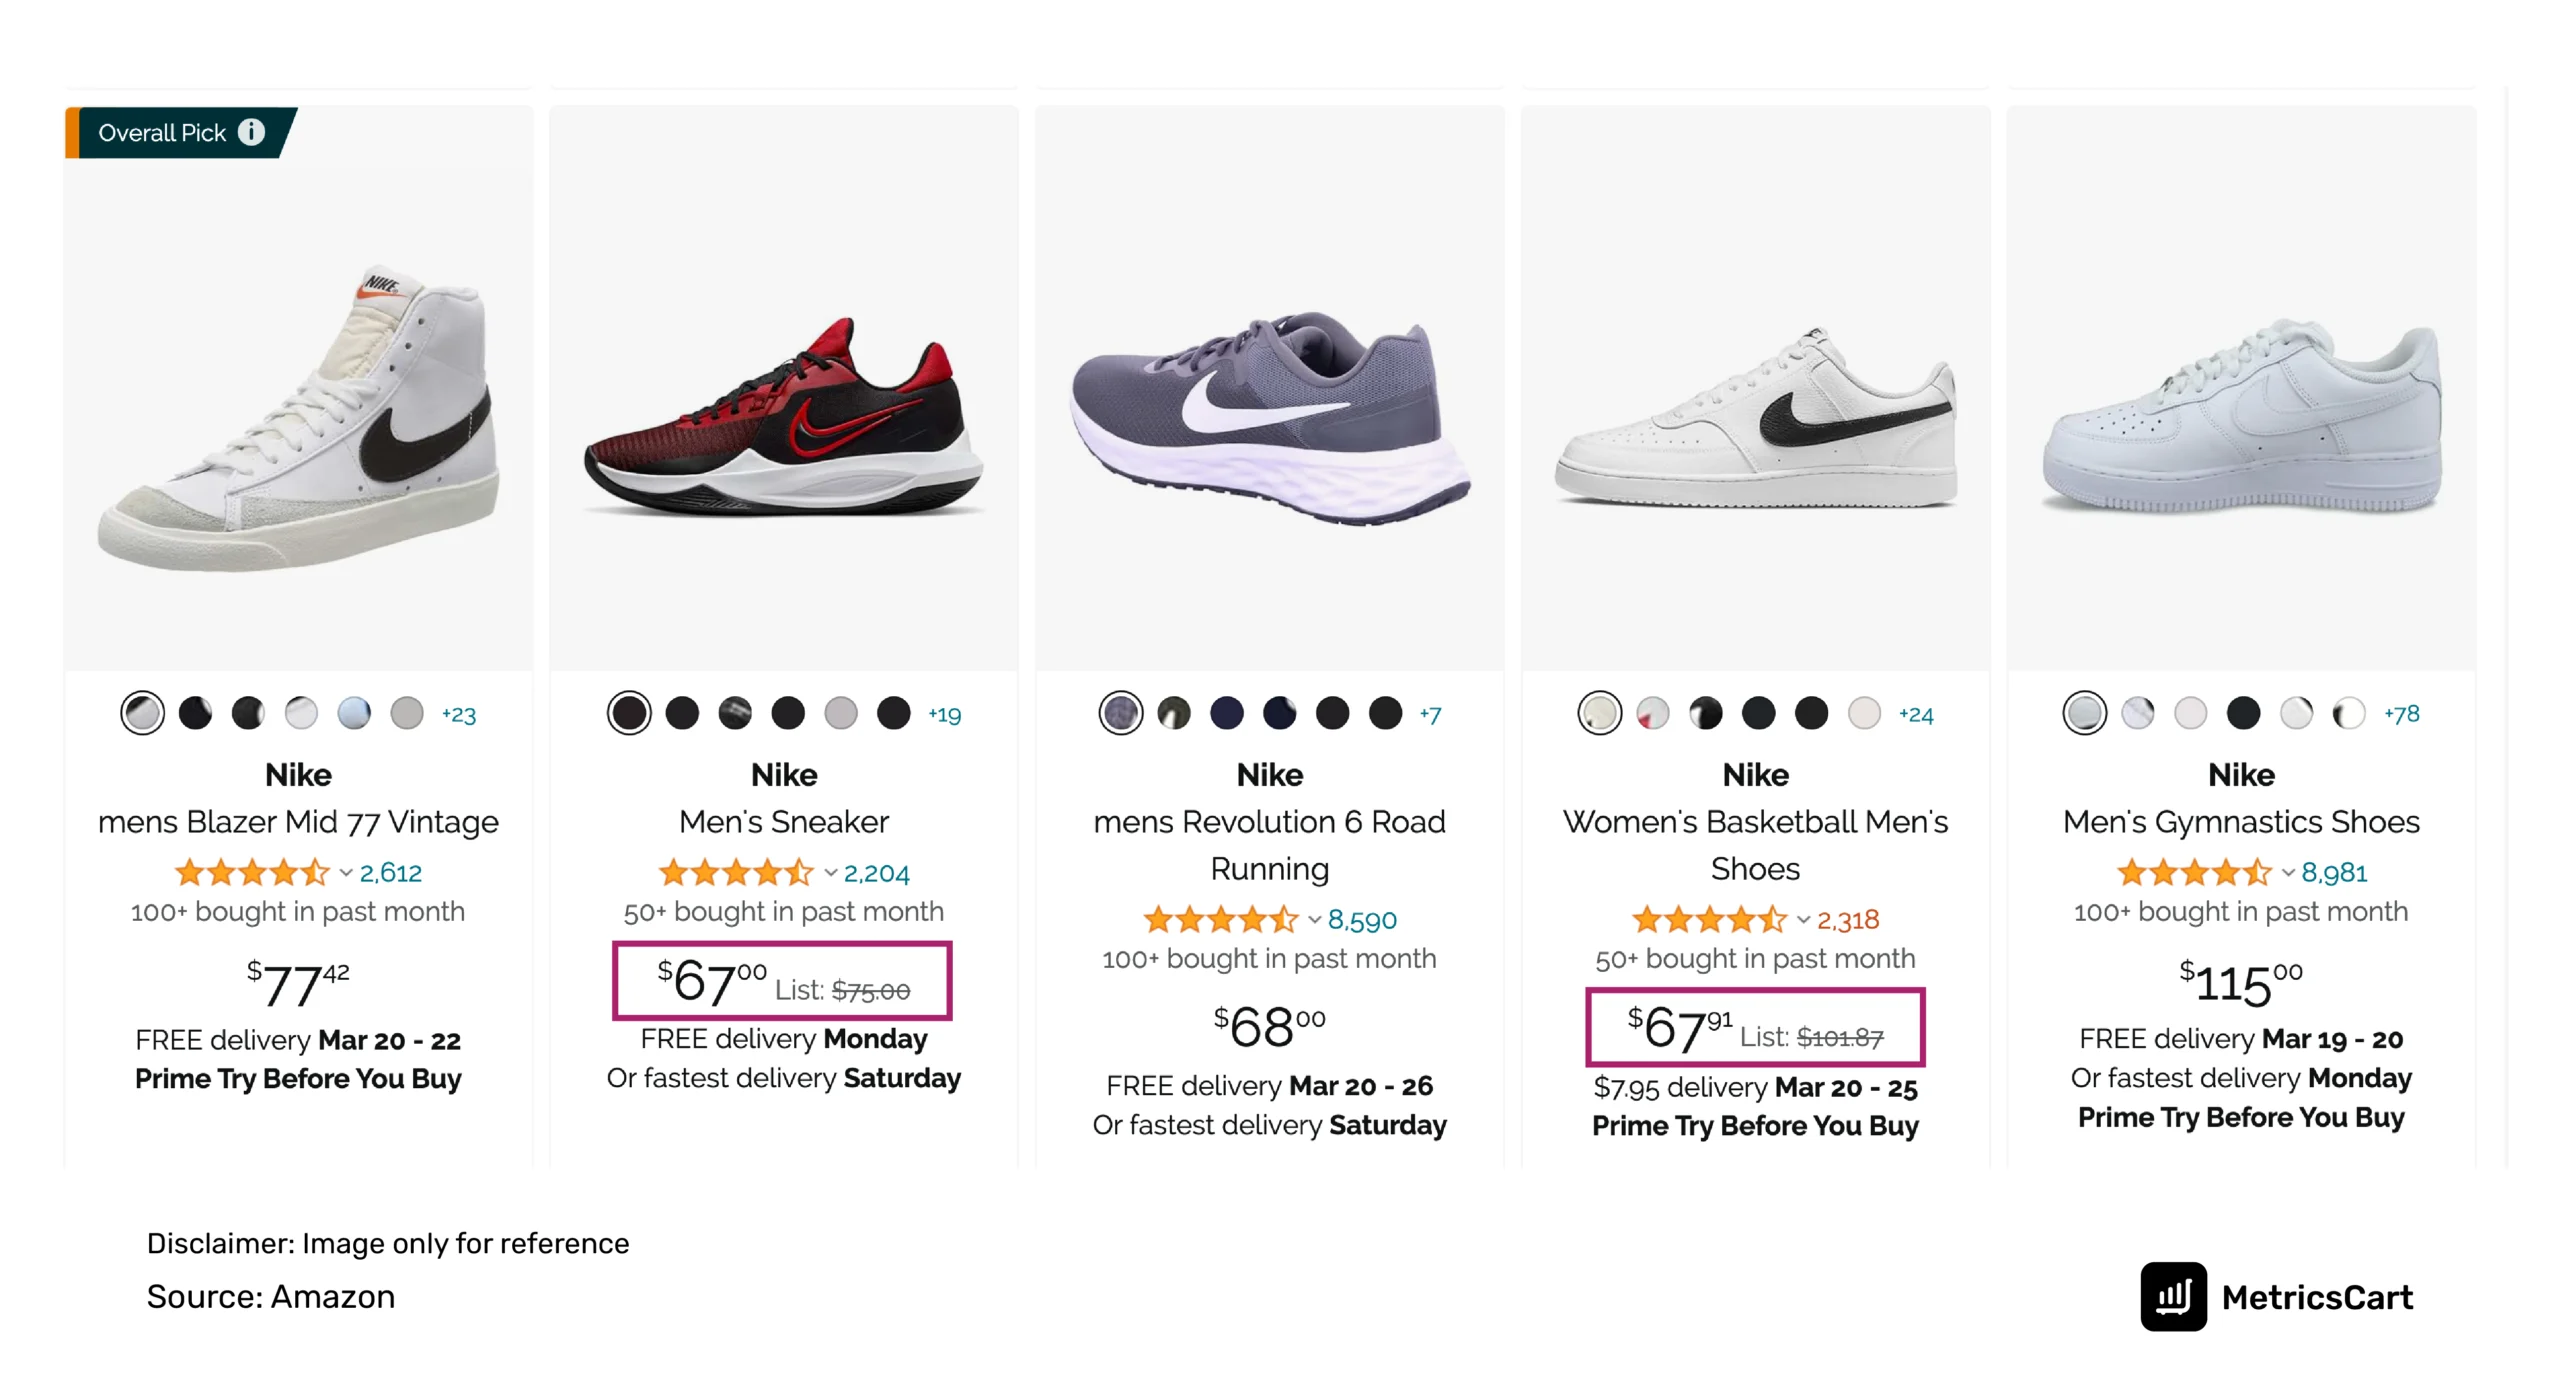 A screenshot of search results for Nike Shoes in Amazon marketplace.